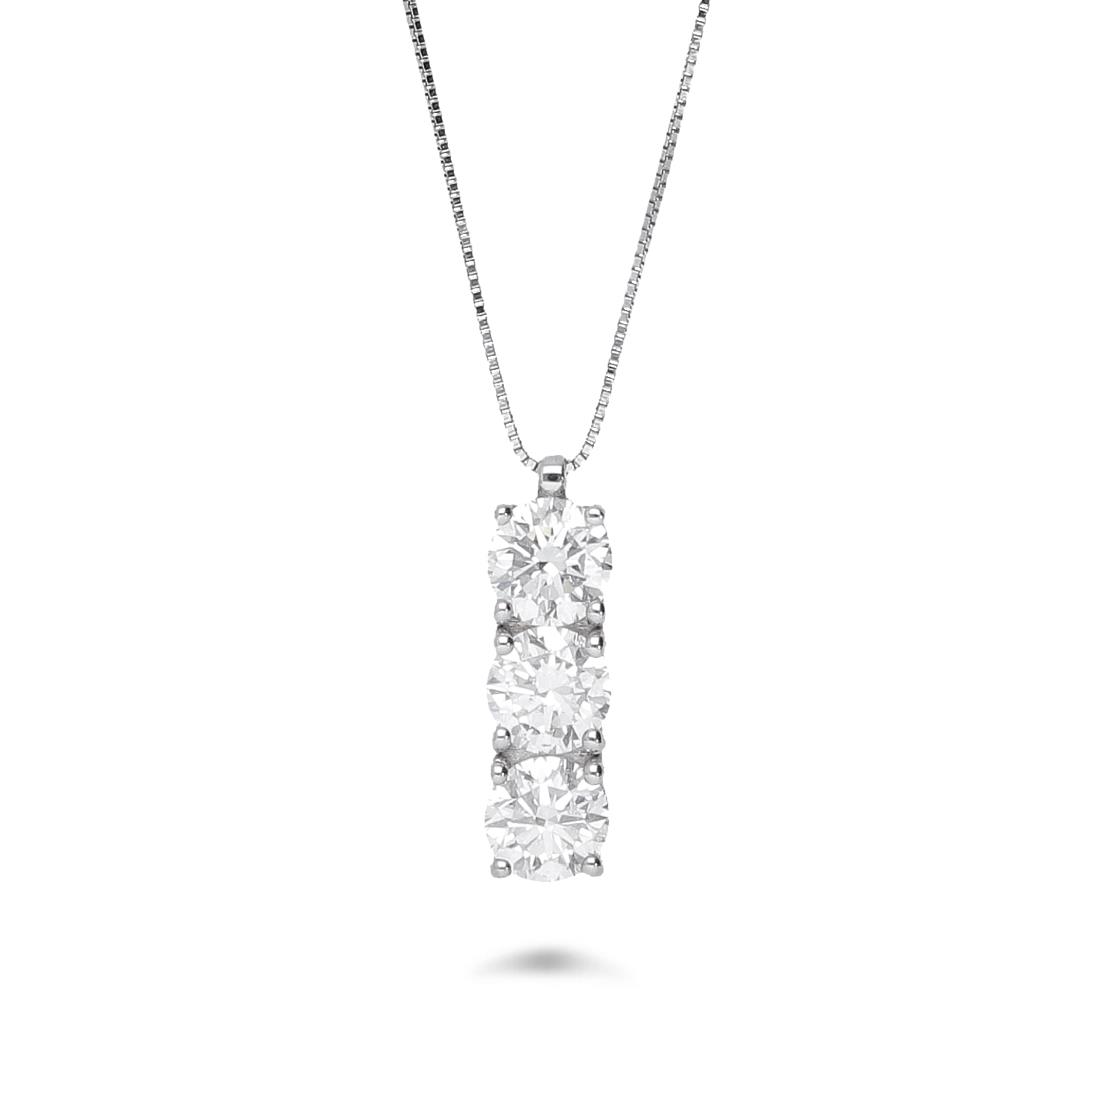 Trilogy necklace in white gold with diamonds ct 1,24 - ALFIERI & ST. JOHN